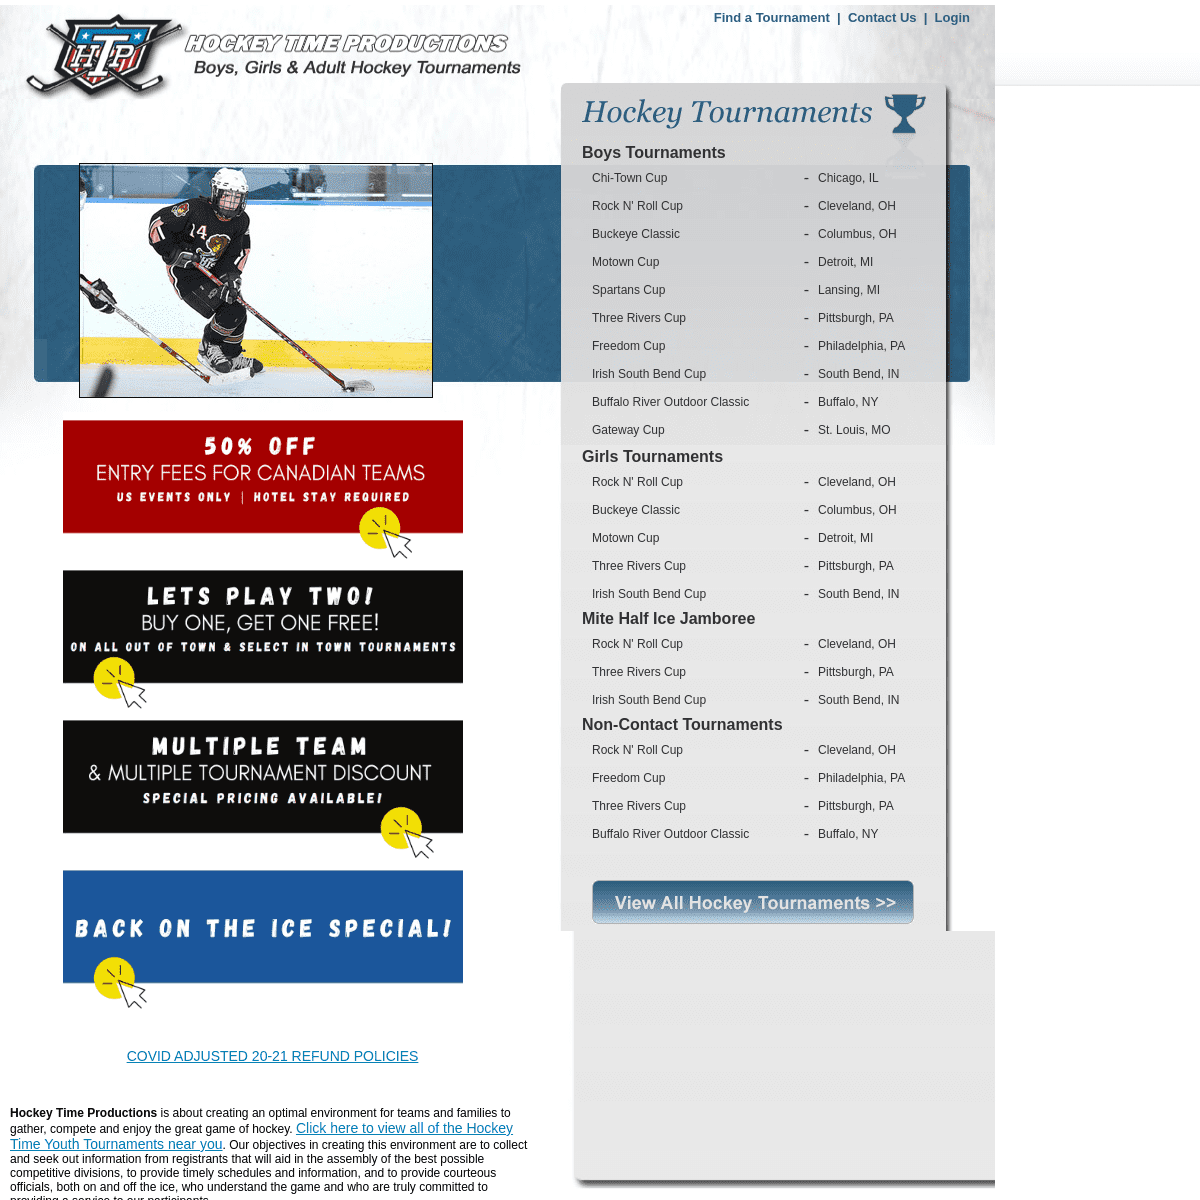 A complete backup of http://www.itshockeytime.com/